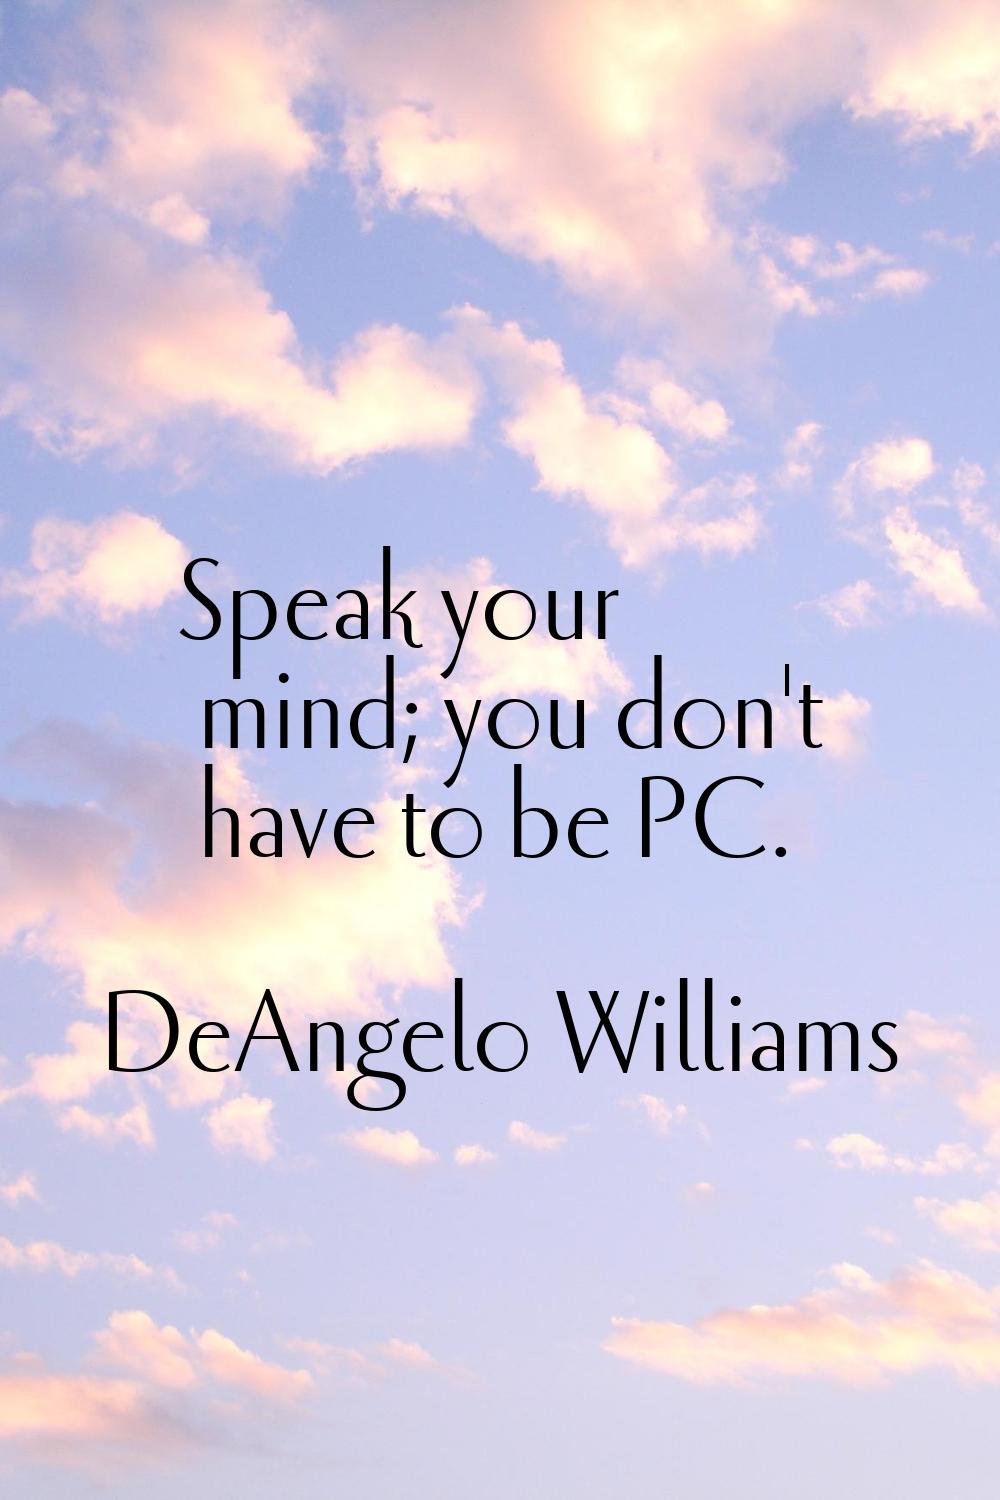 Speak your mind; you don't have to be PC.